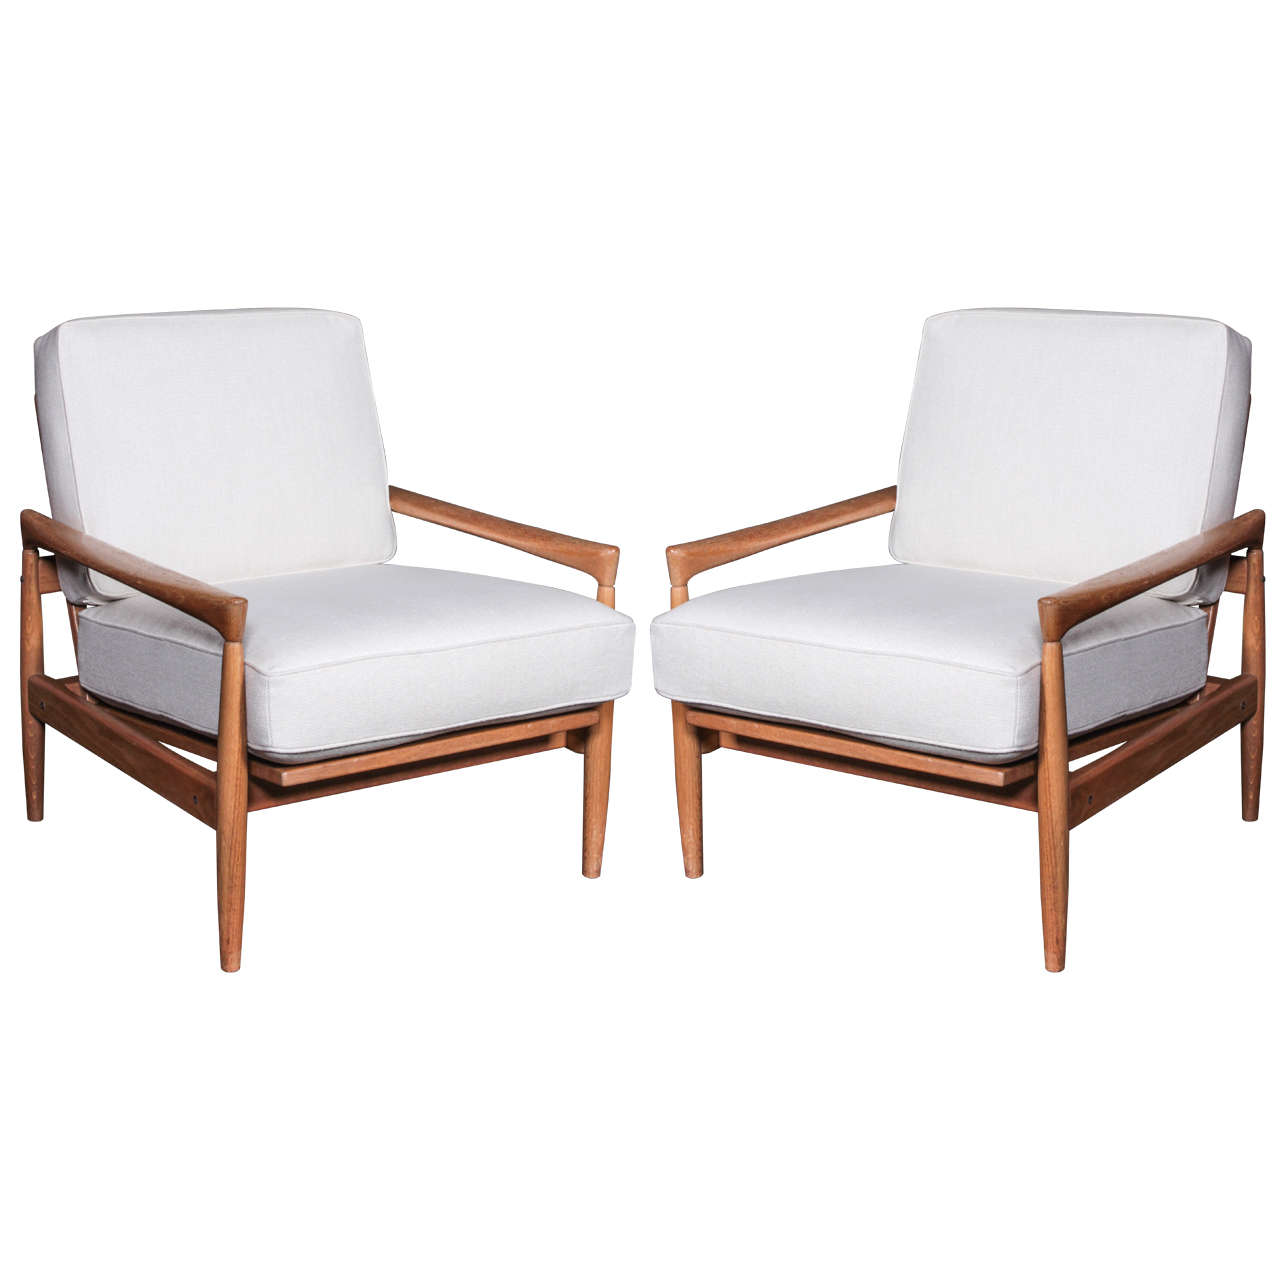 Reupholstered Mid Century Teak Arm Chairs For Sale